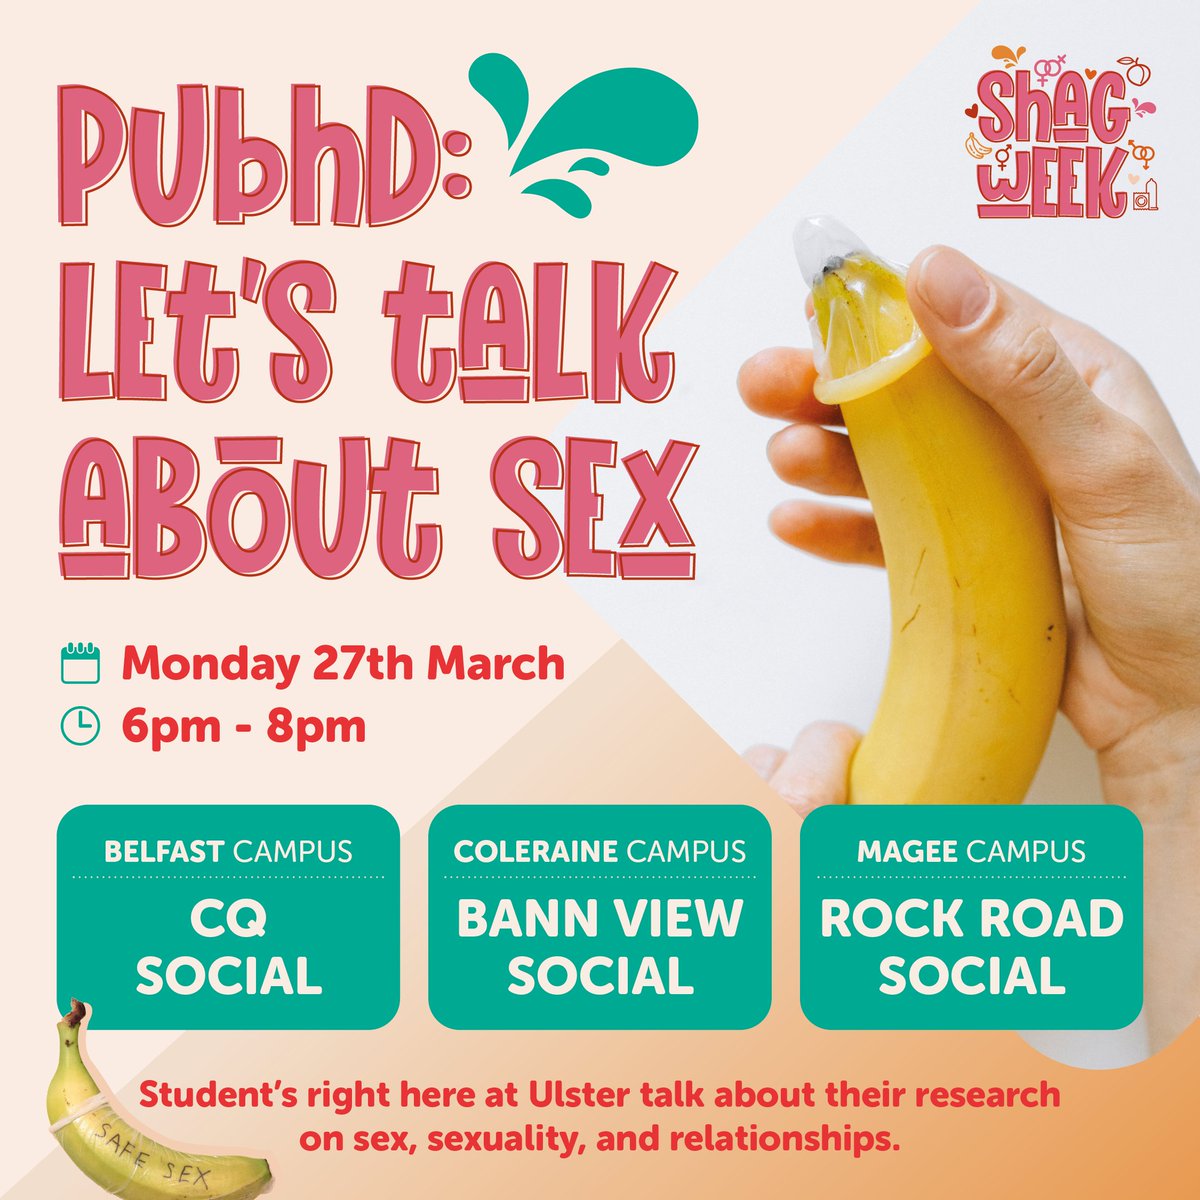 PGR'S we NEED you
We need more speakers for our PubhD event! 
Doing research on gender identity? Have thoughts about sex in society? Doing a paper on sexuality? 
This is a great opp to share your thoughts/findings!
Email Rosie - s.mckenna@ulster.ac.uk to get involved